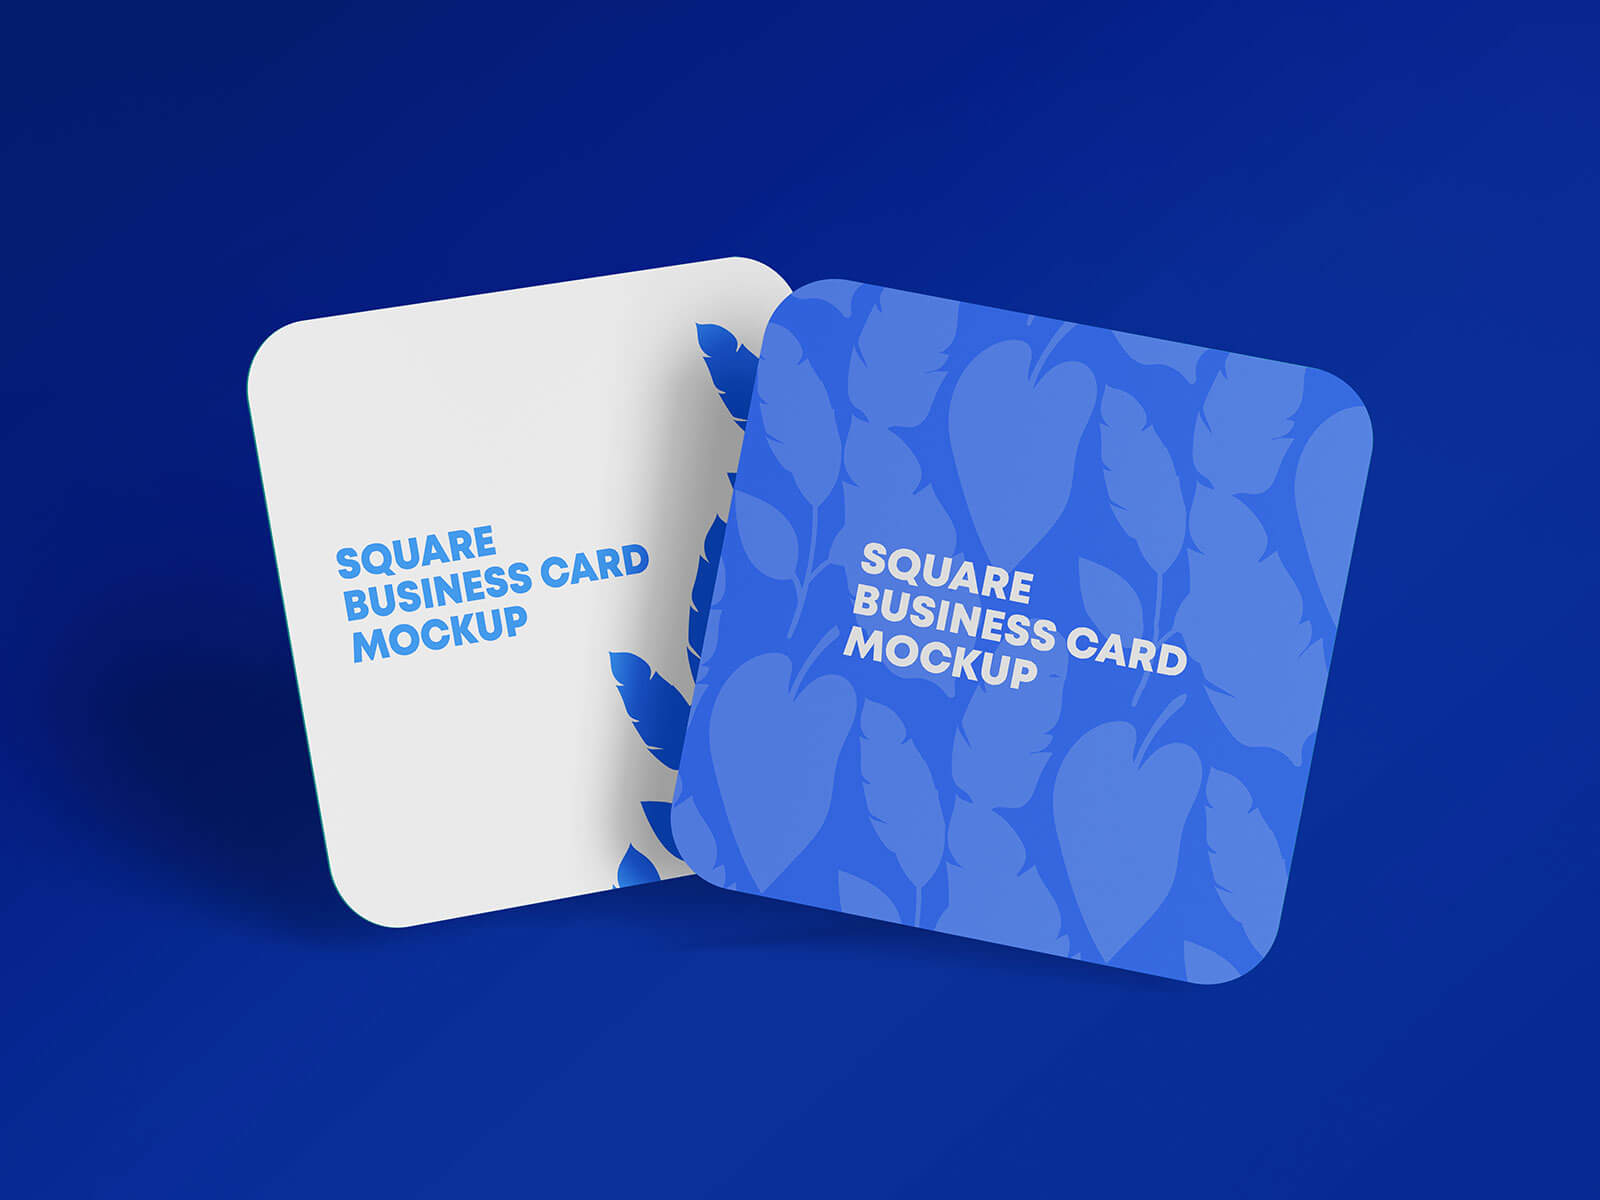 rounded square business cards 1